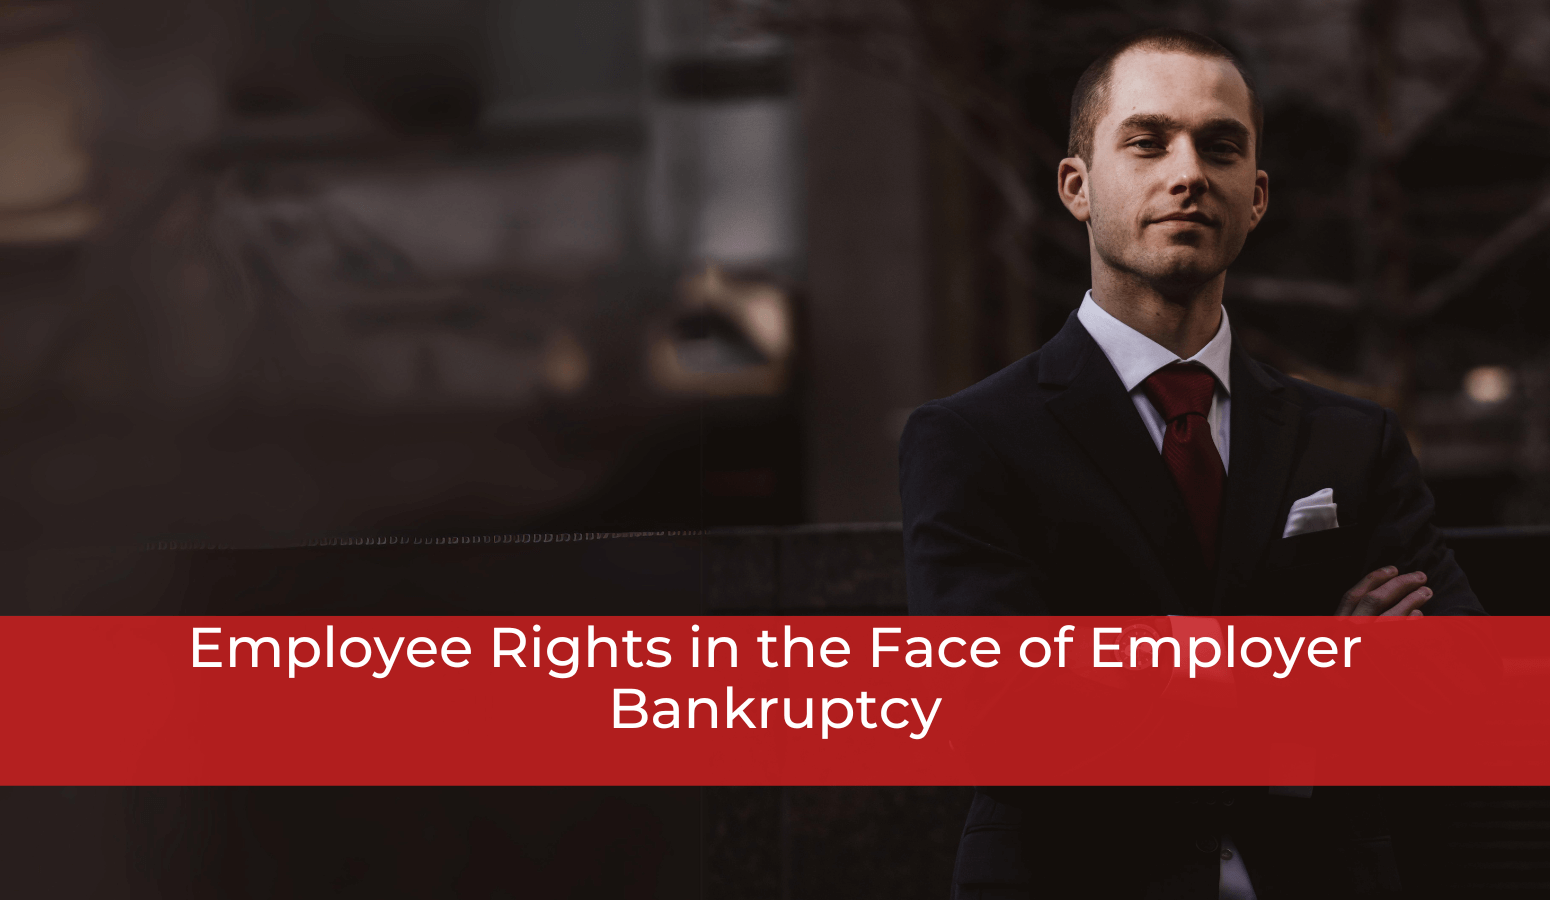 Featured image for “Employee Rights in the Face of Employer Bankruptcy”